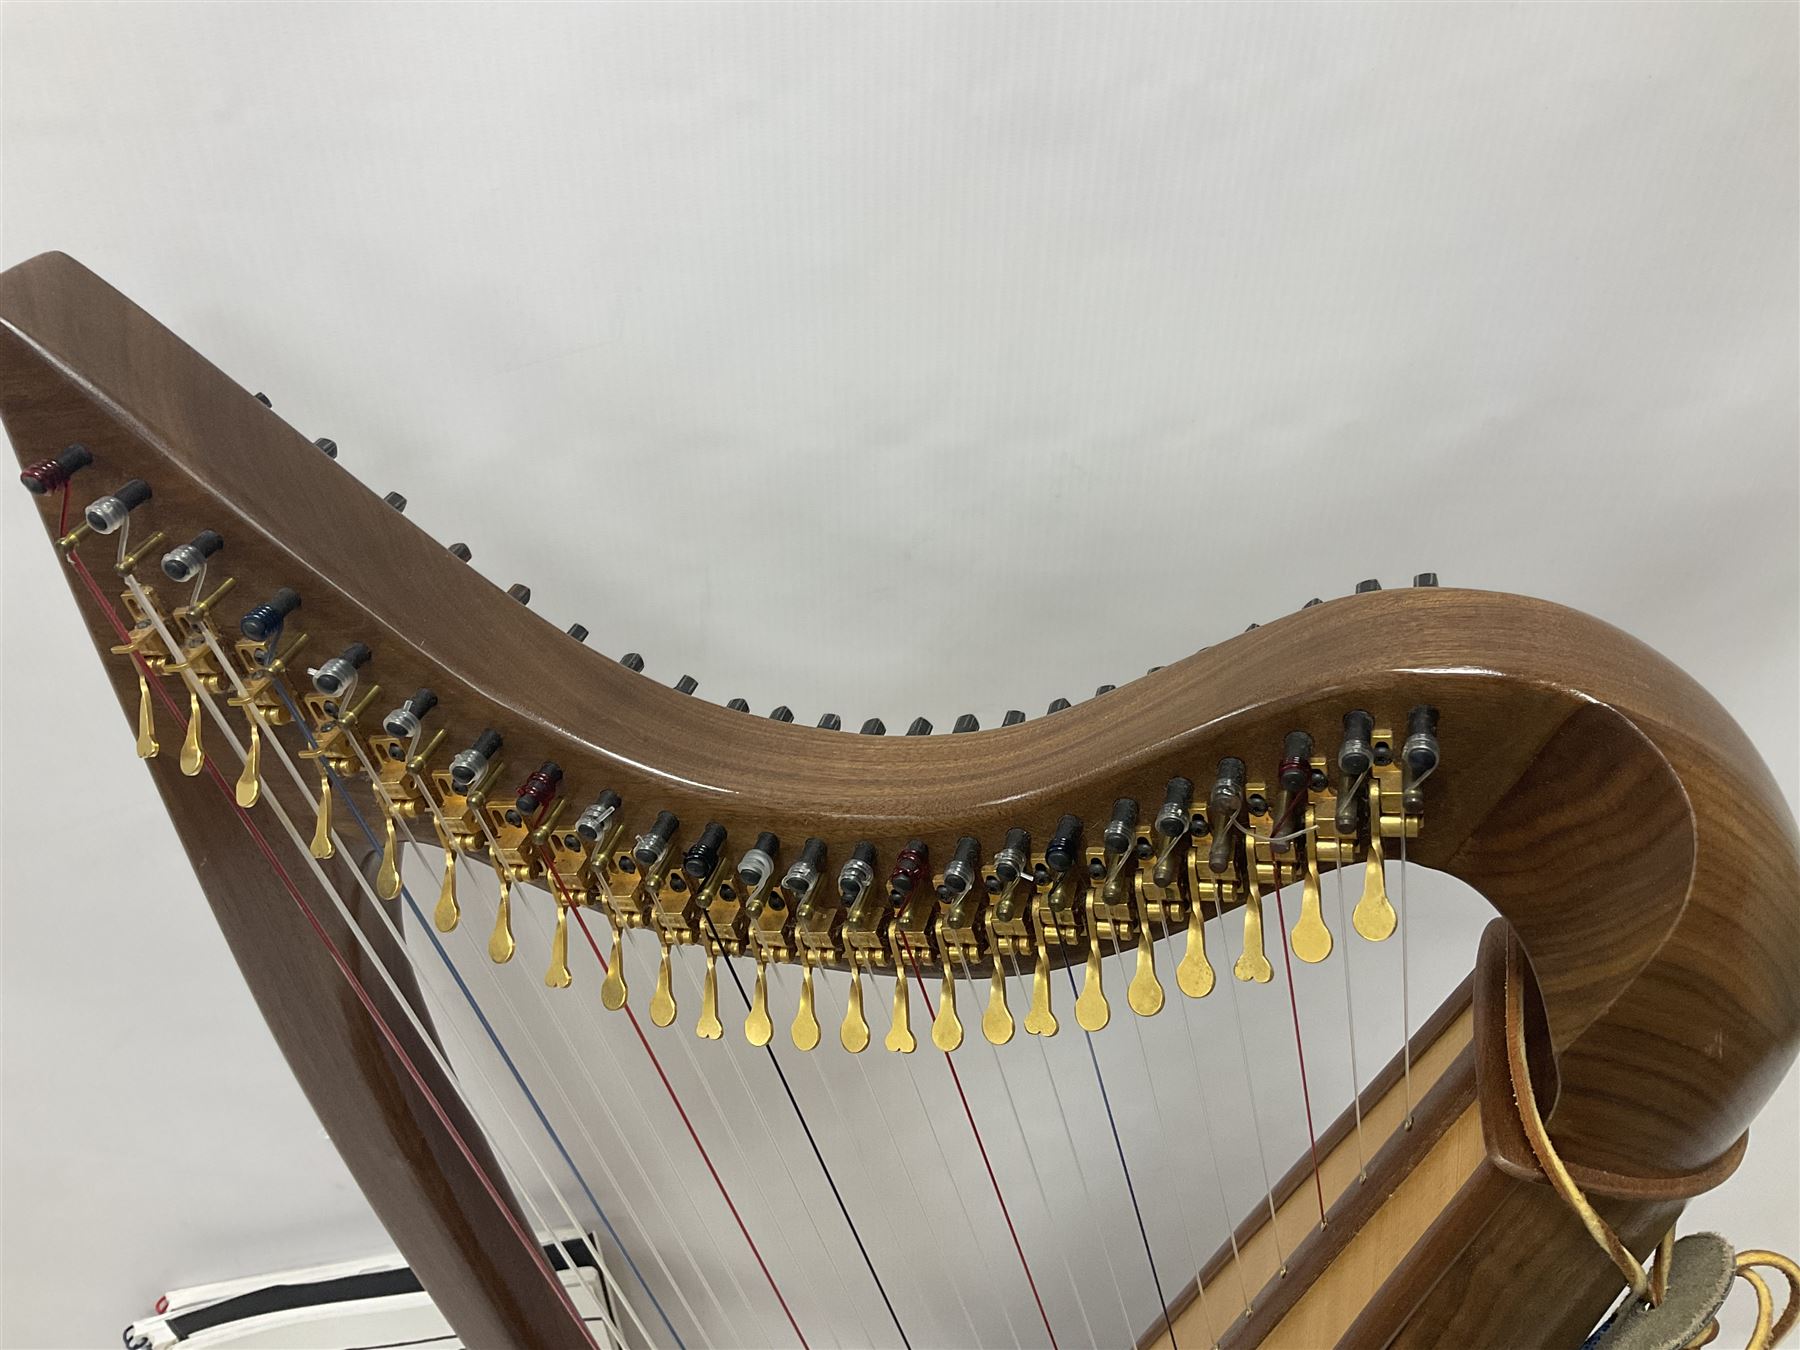 Contemporary 24 string Celtic or Irish Folk Harp with an Ash soundboard and 24 sharpening keys - Image 10 of 15